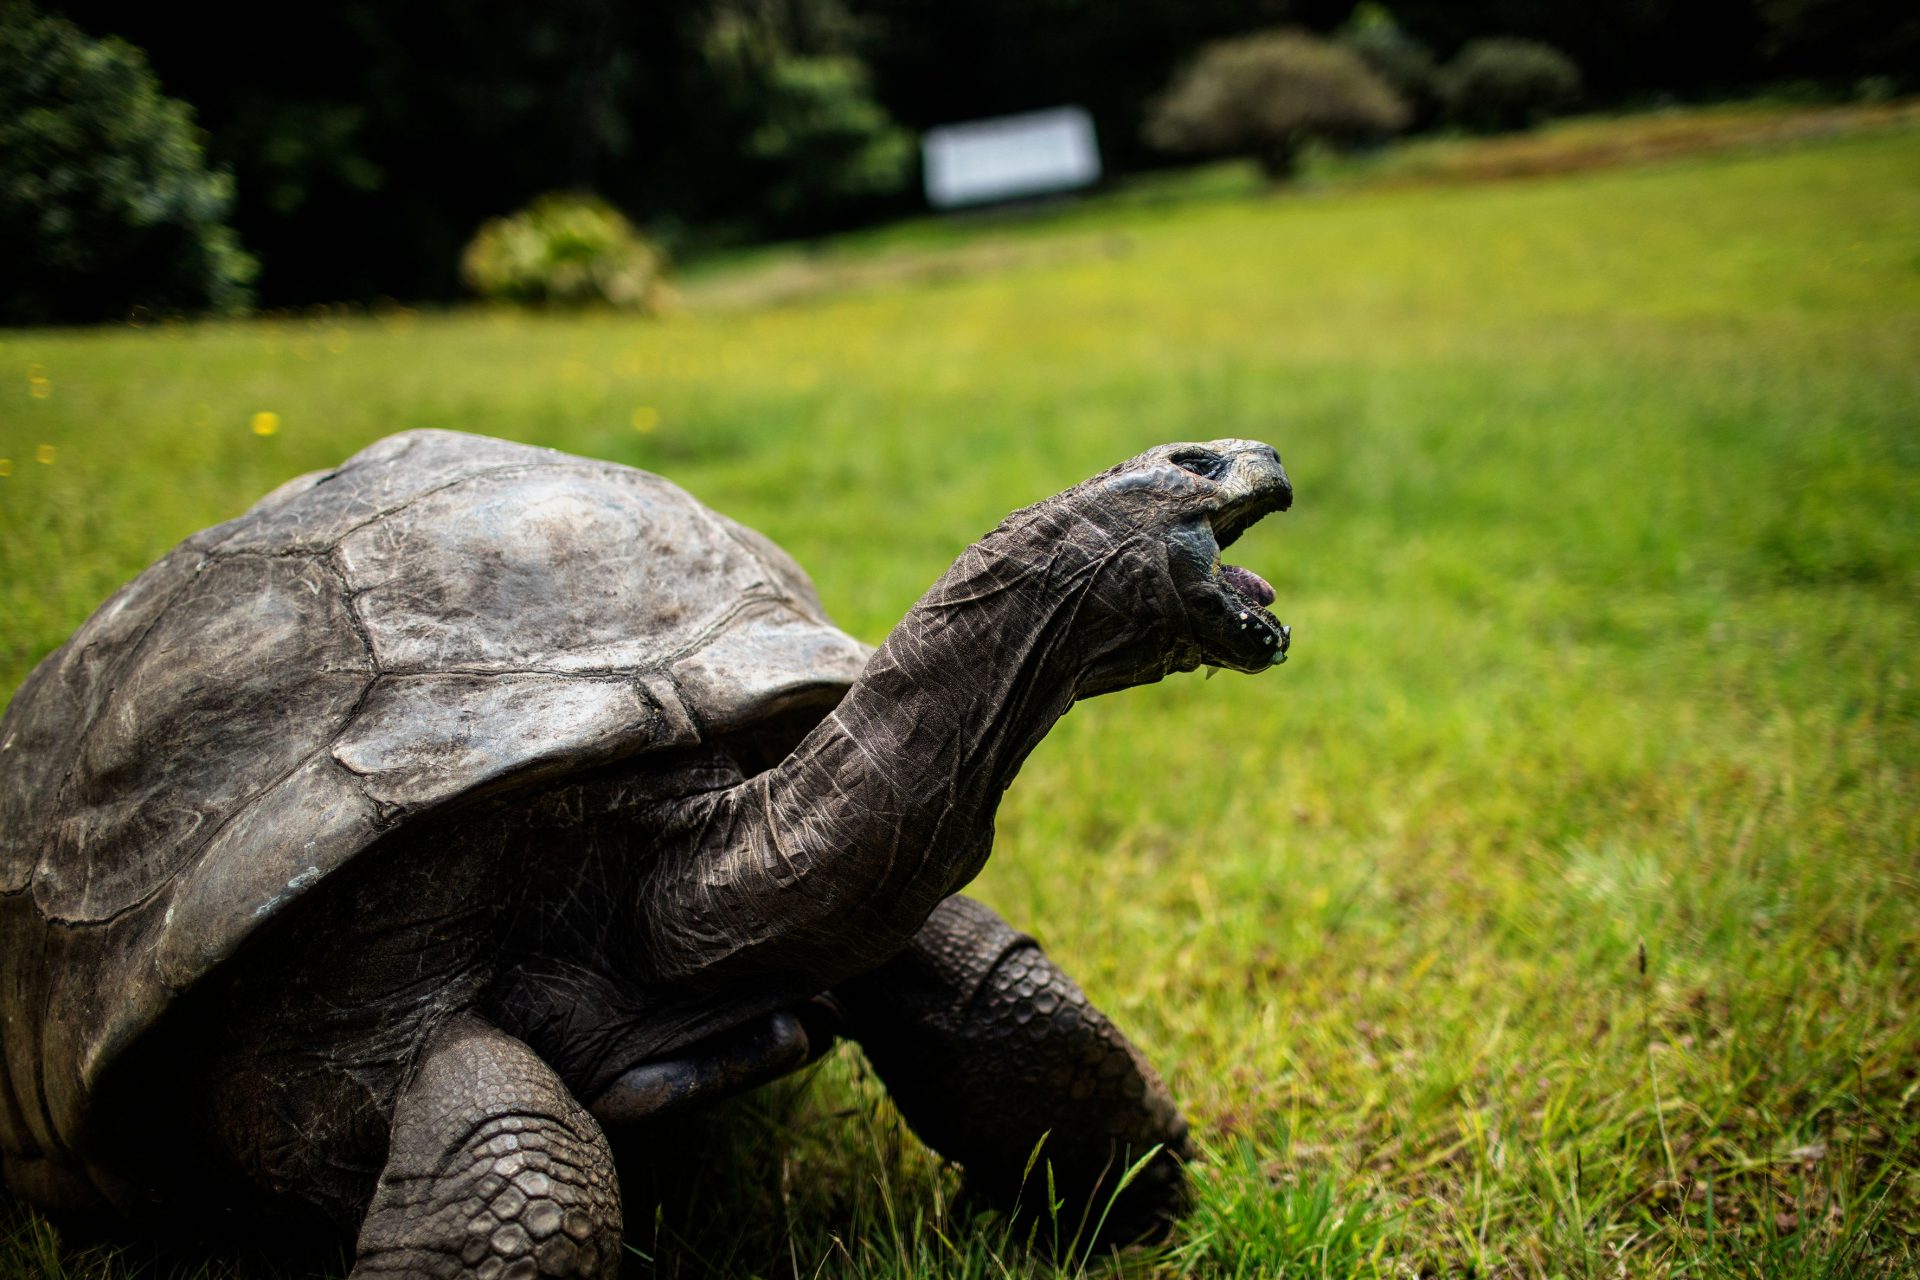 At 192 Jonathan the tortoise is the world's oldest living land animal